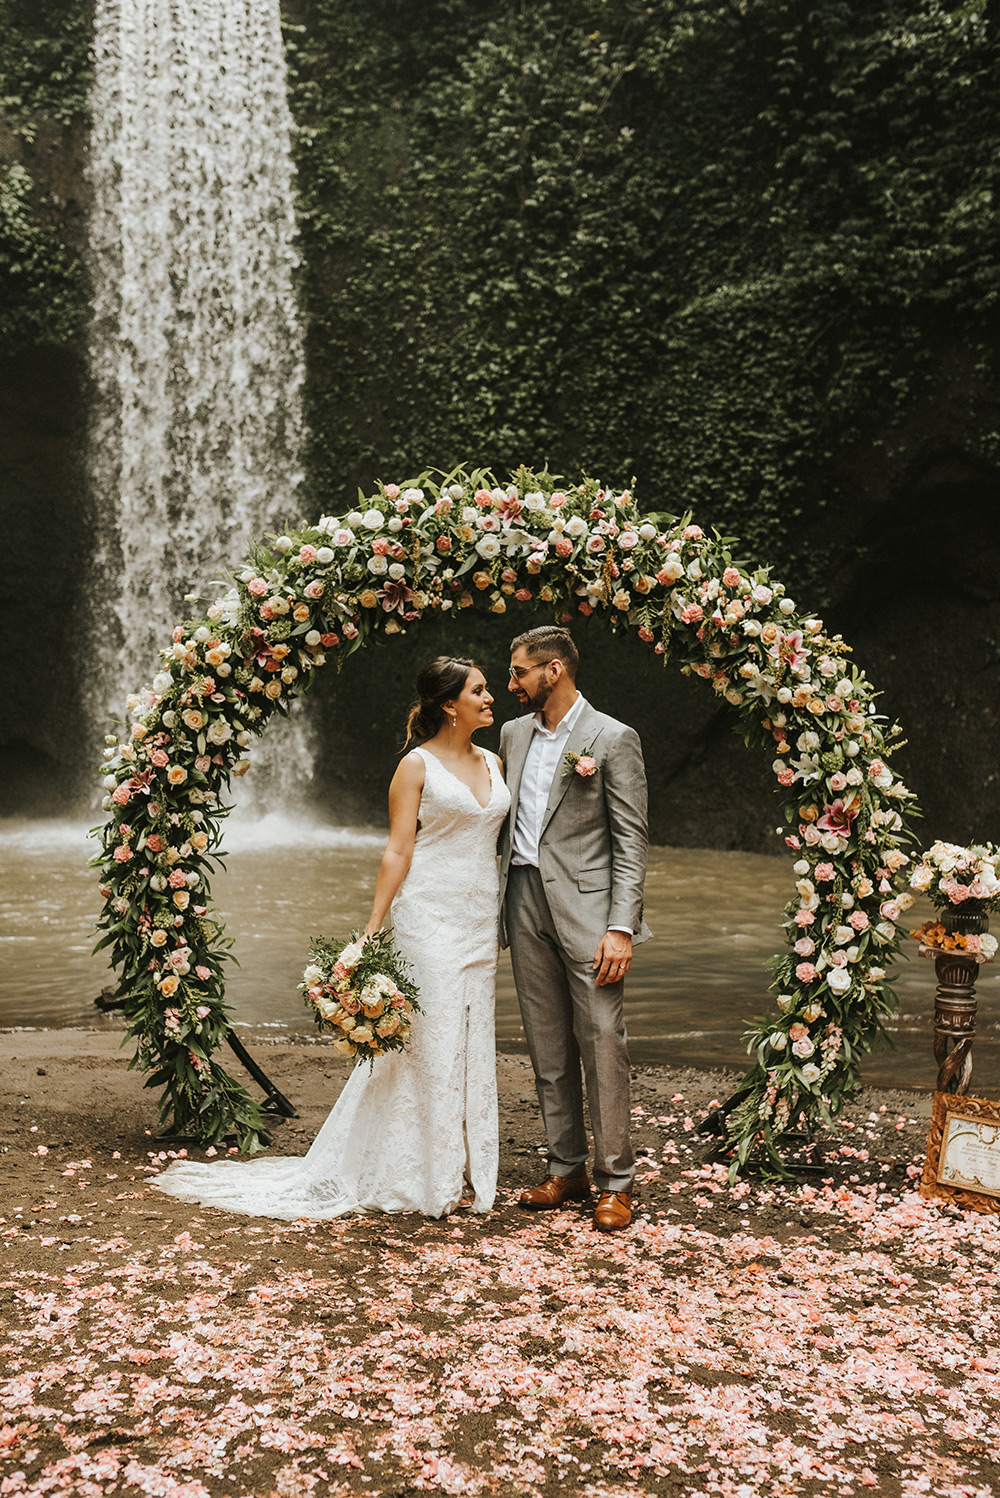 6 amazing Bali elopements and tips on planning your own